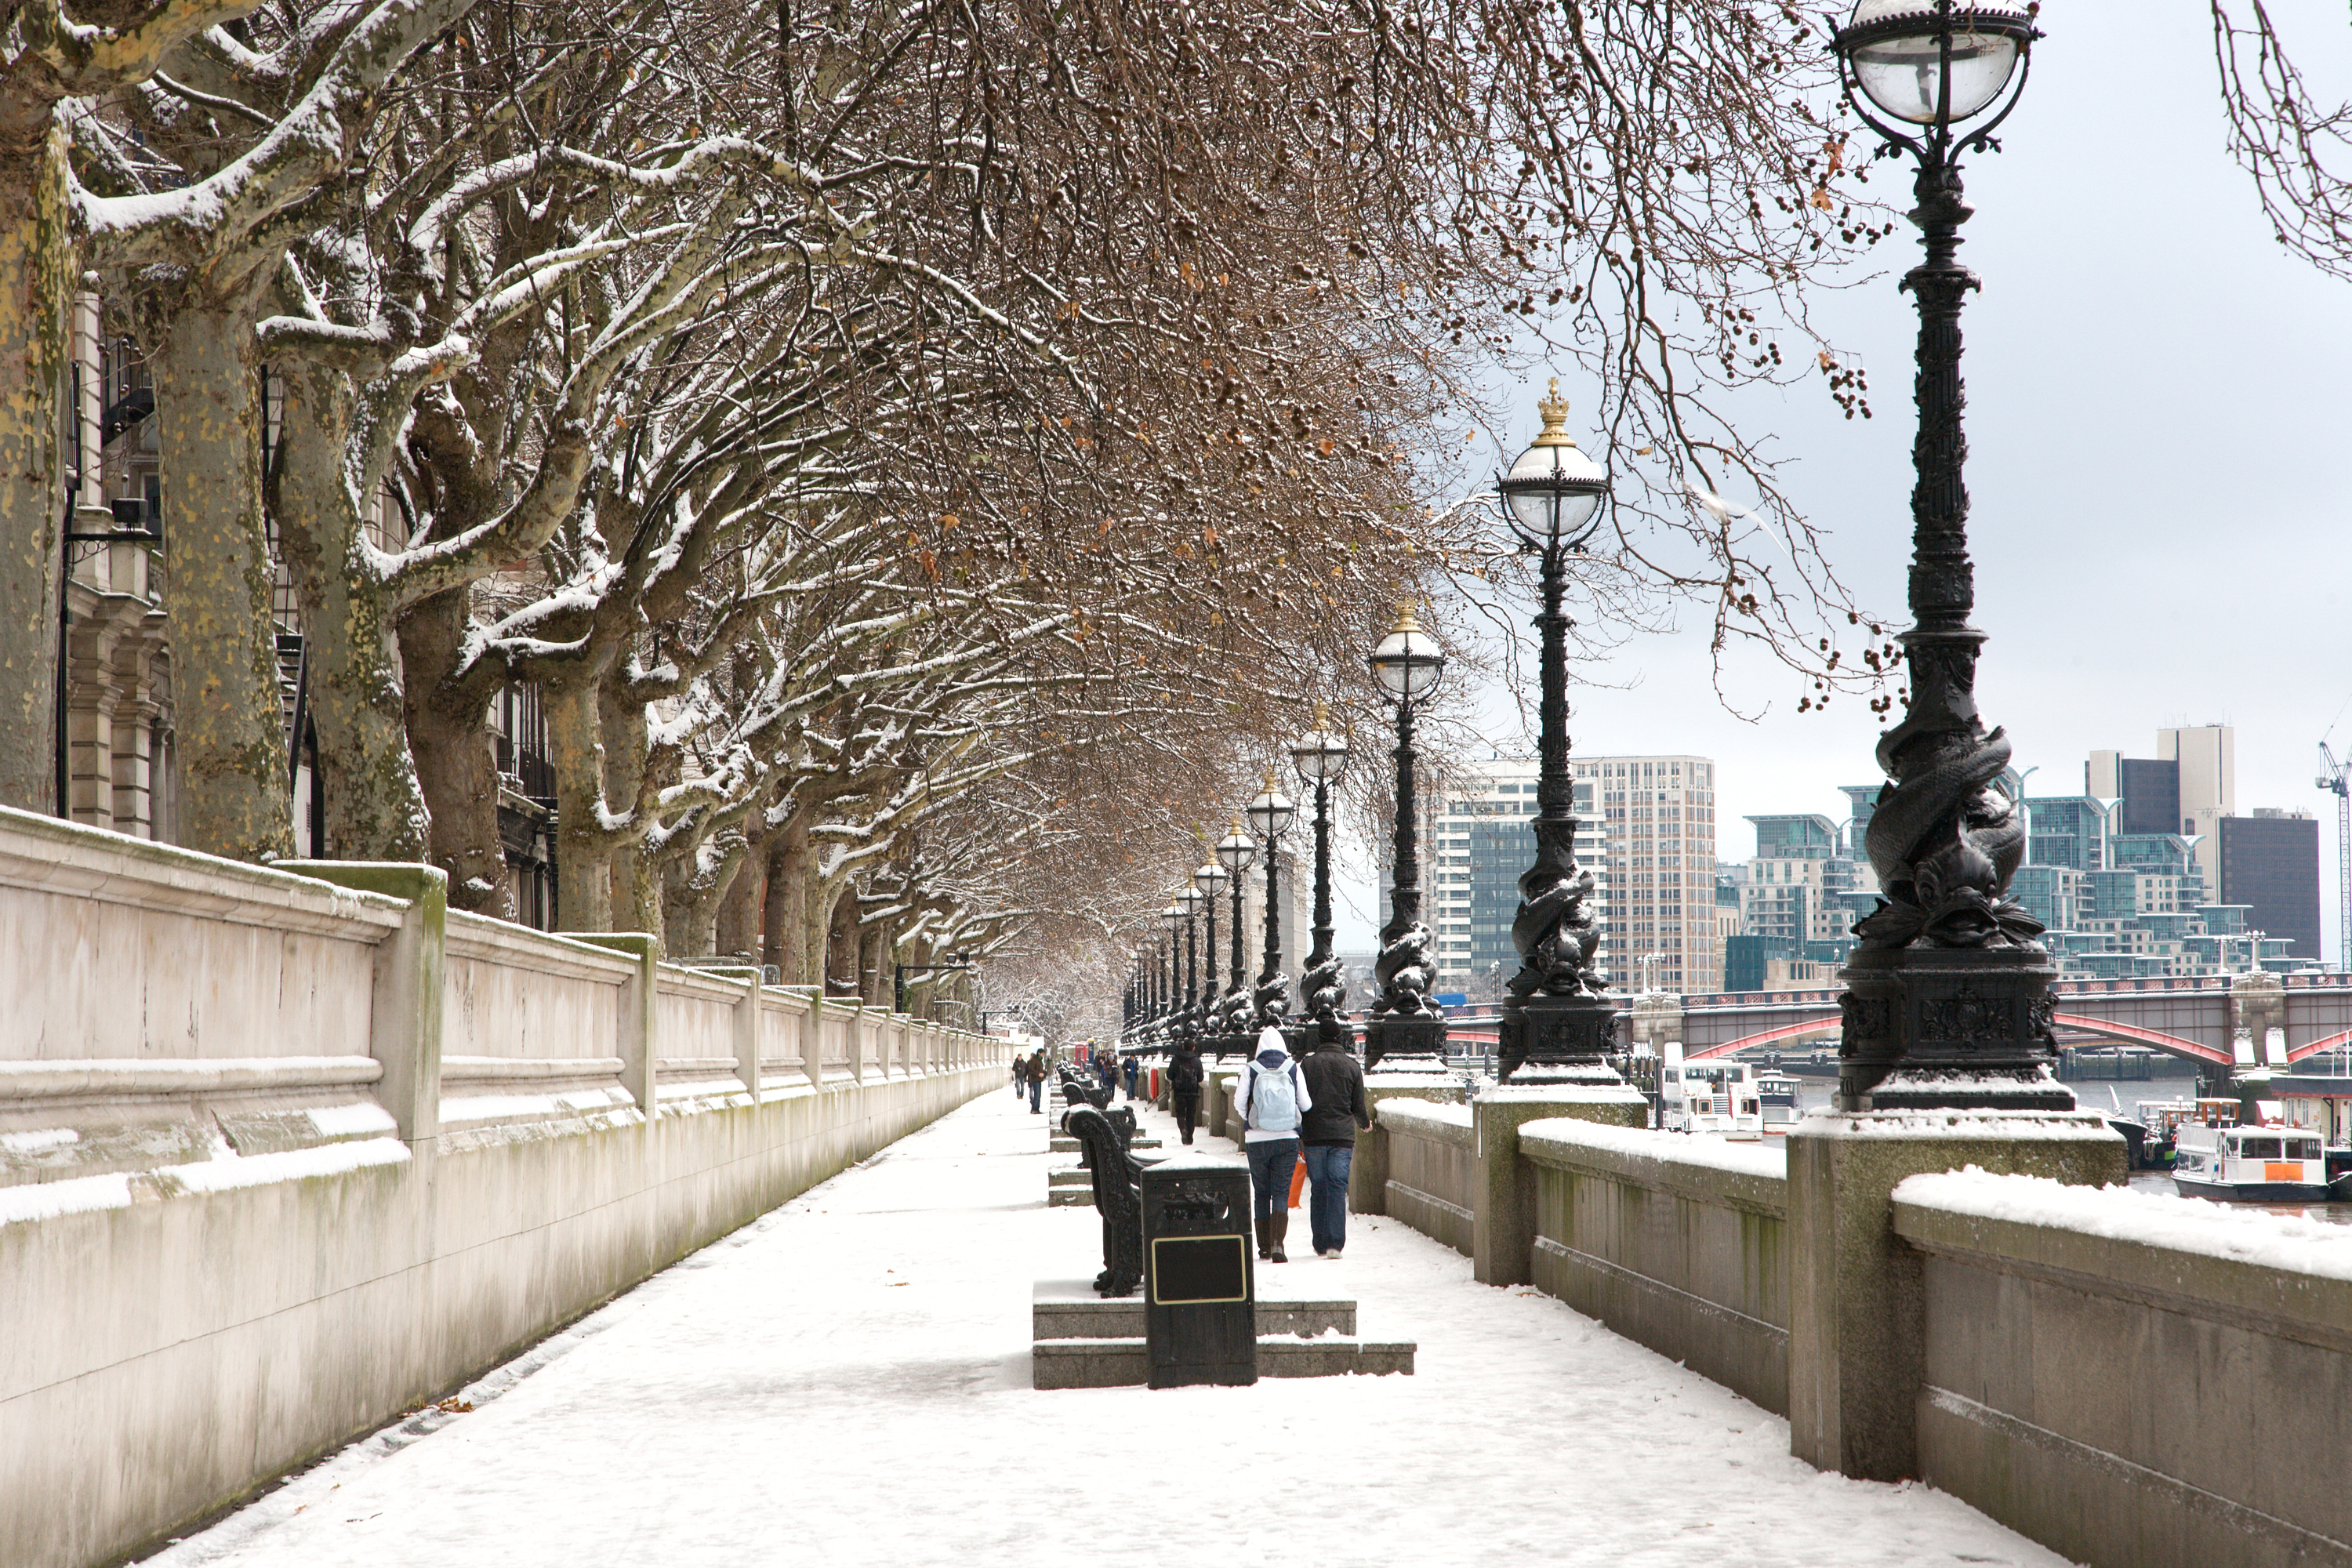 Best Things To Do This Winter In London | Amazing Events To Warm You Up